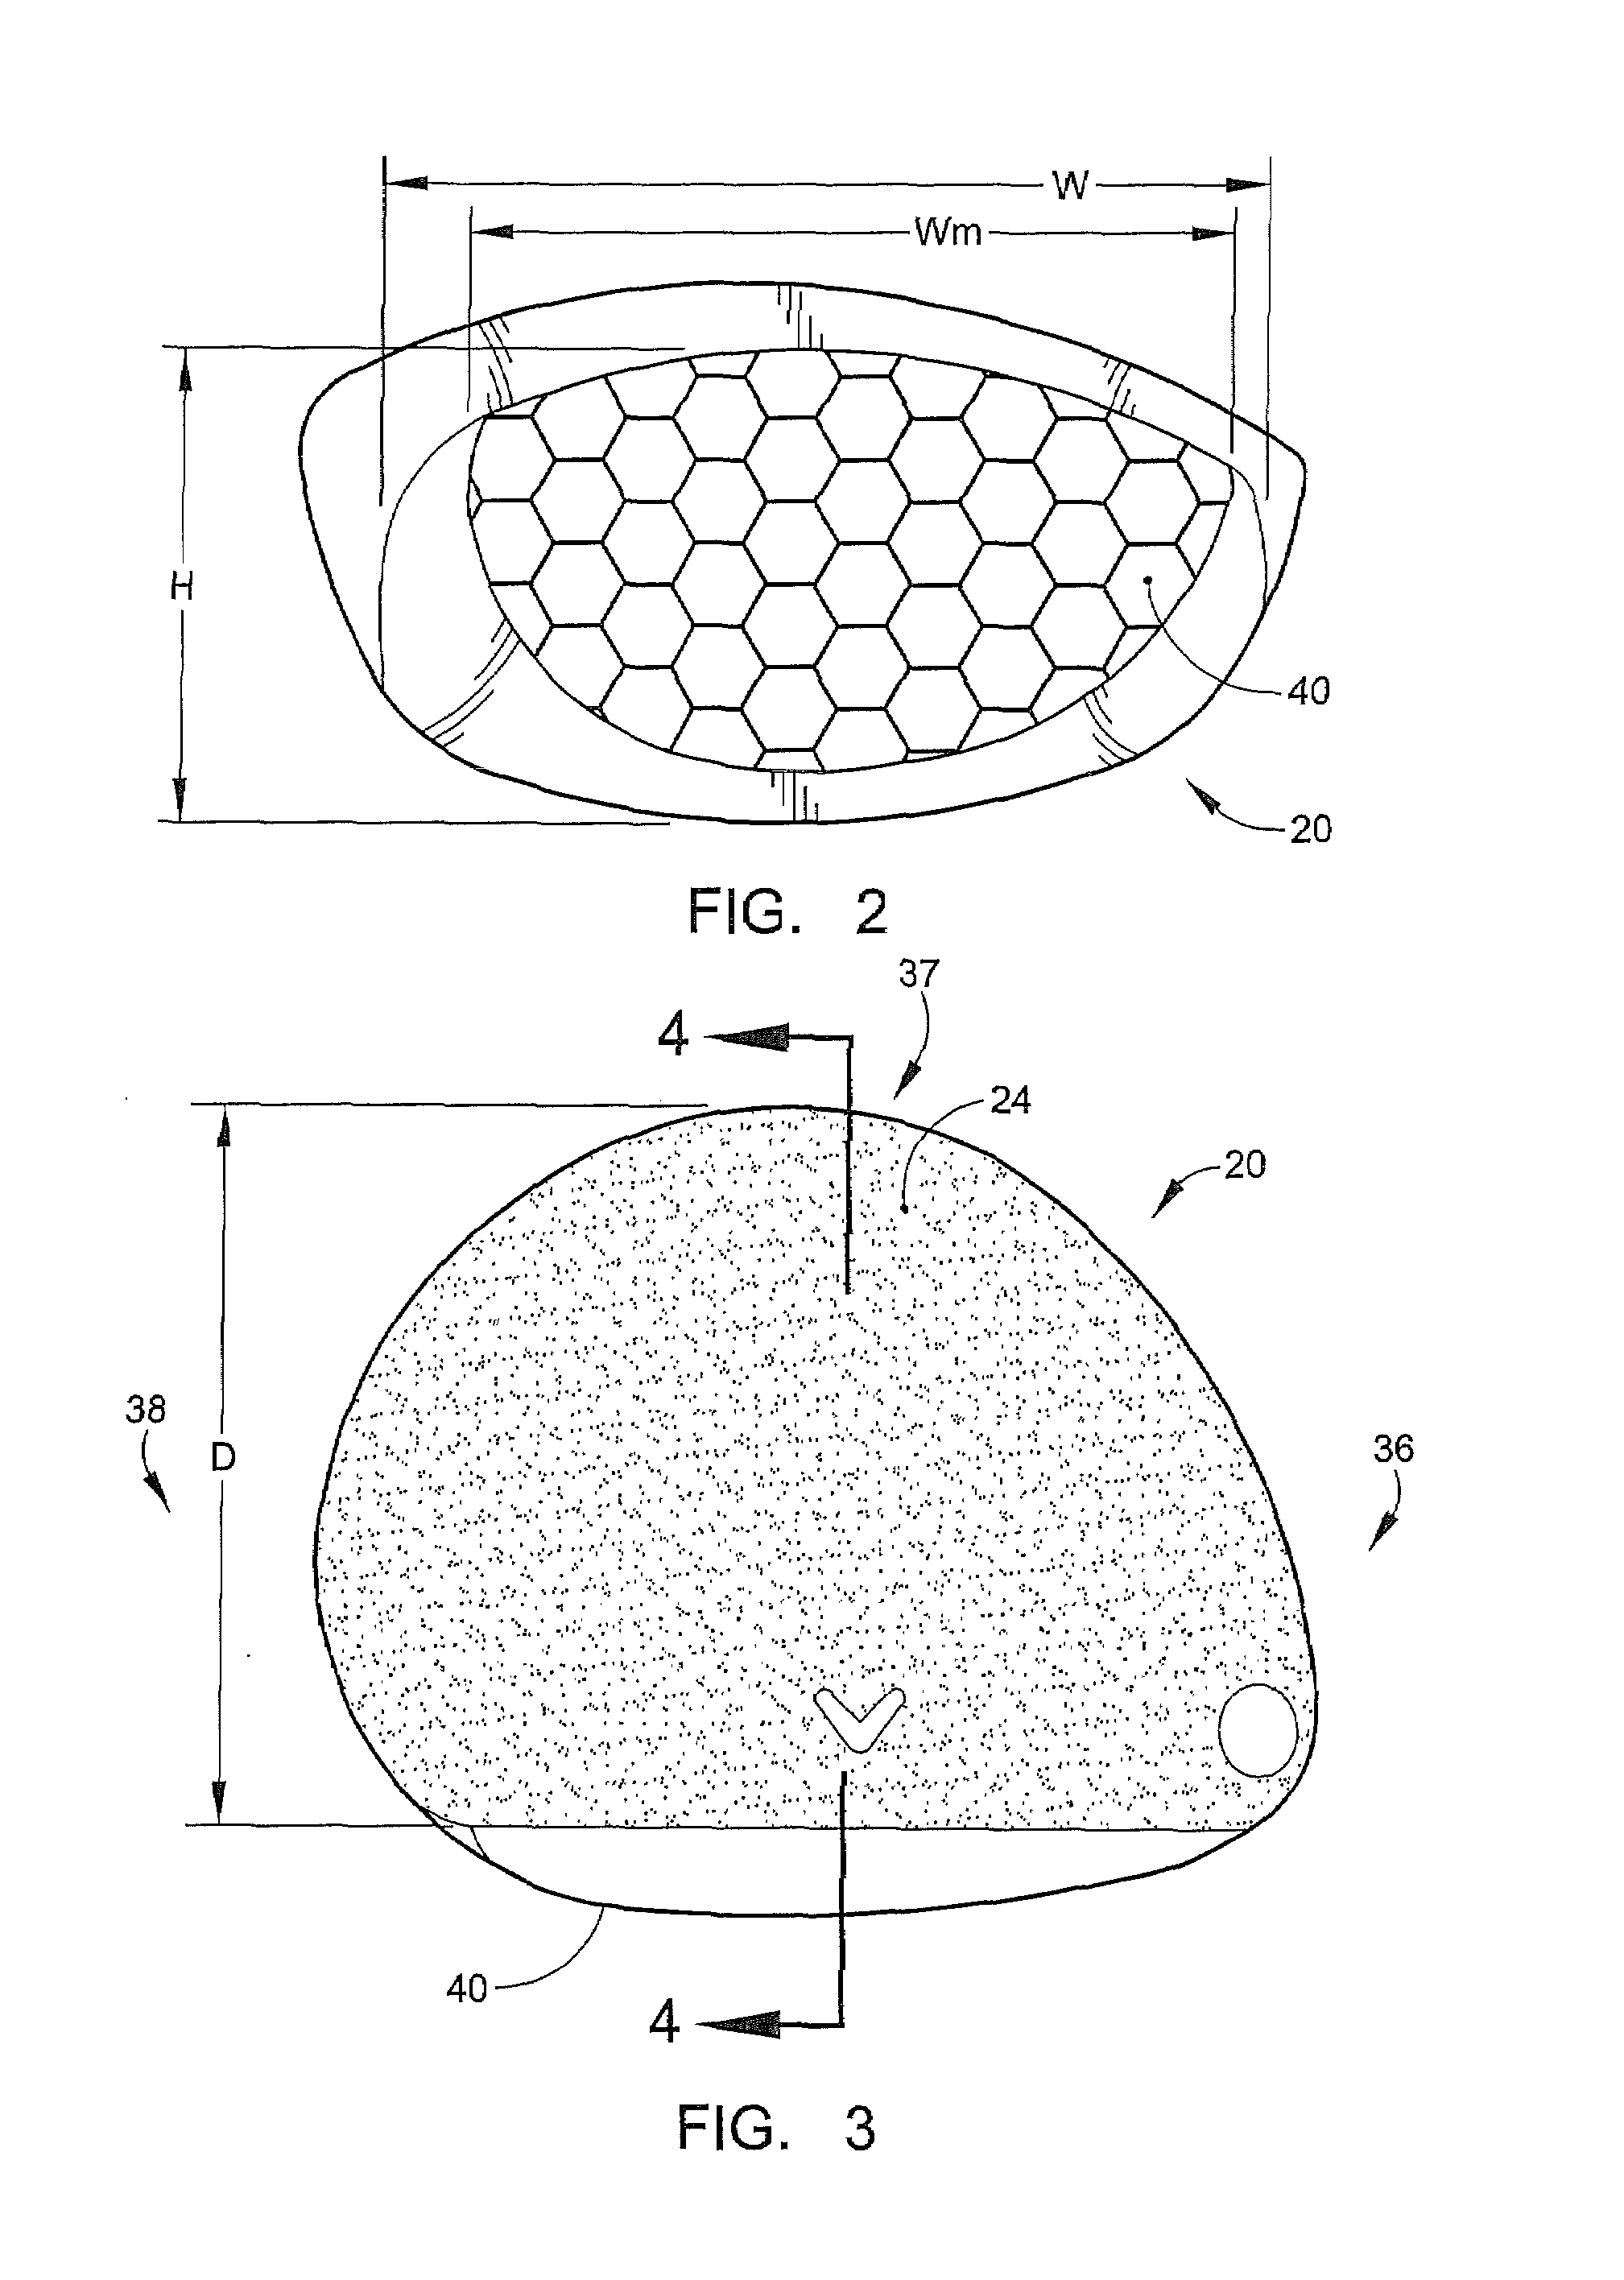 Method and apparatus for forming a face structure for a golf club head